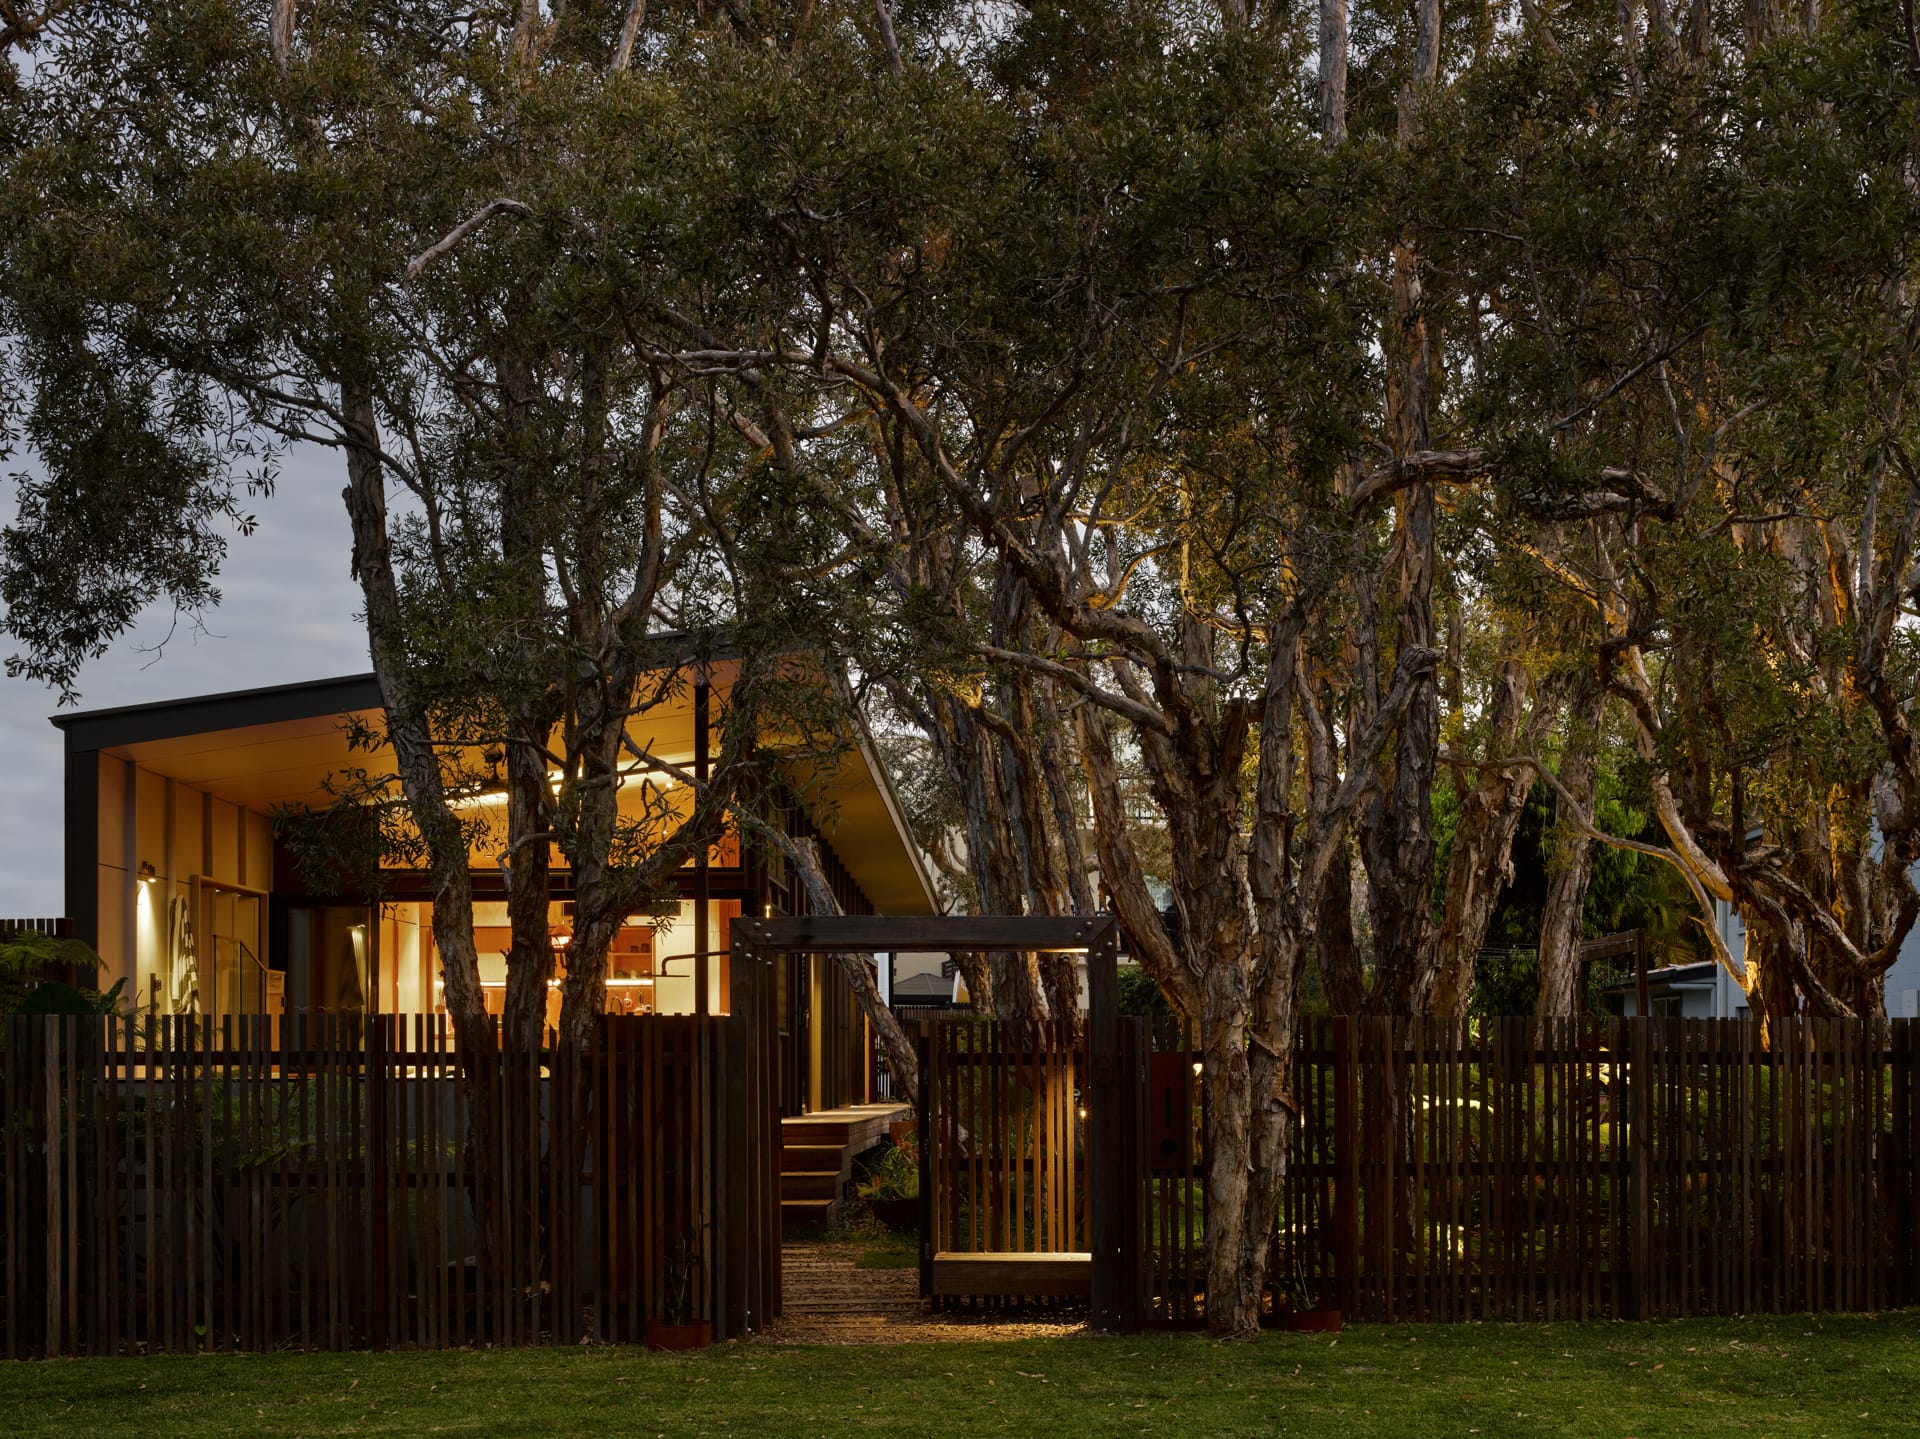 PaperBark Pod by Bark Design. Photography by Christopher Frederick Jones. Streetview of home with slanted roofline and many paperbark trees. Rustic timber fence. Warm light coming from interior. 